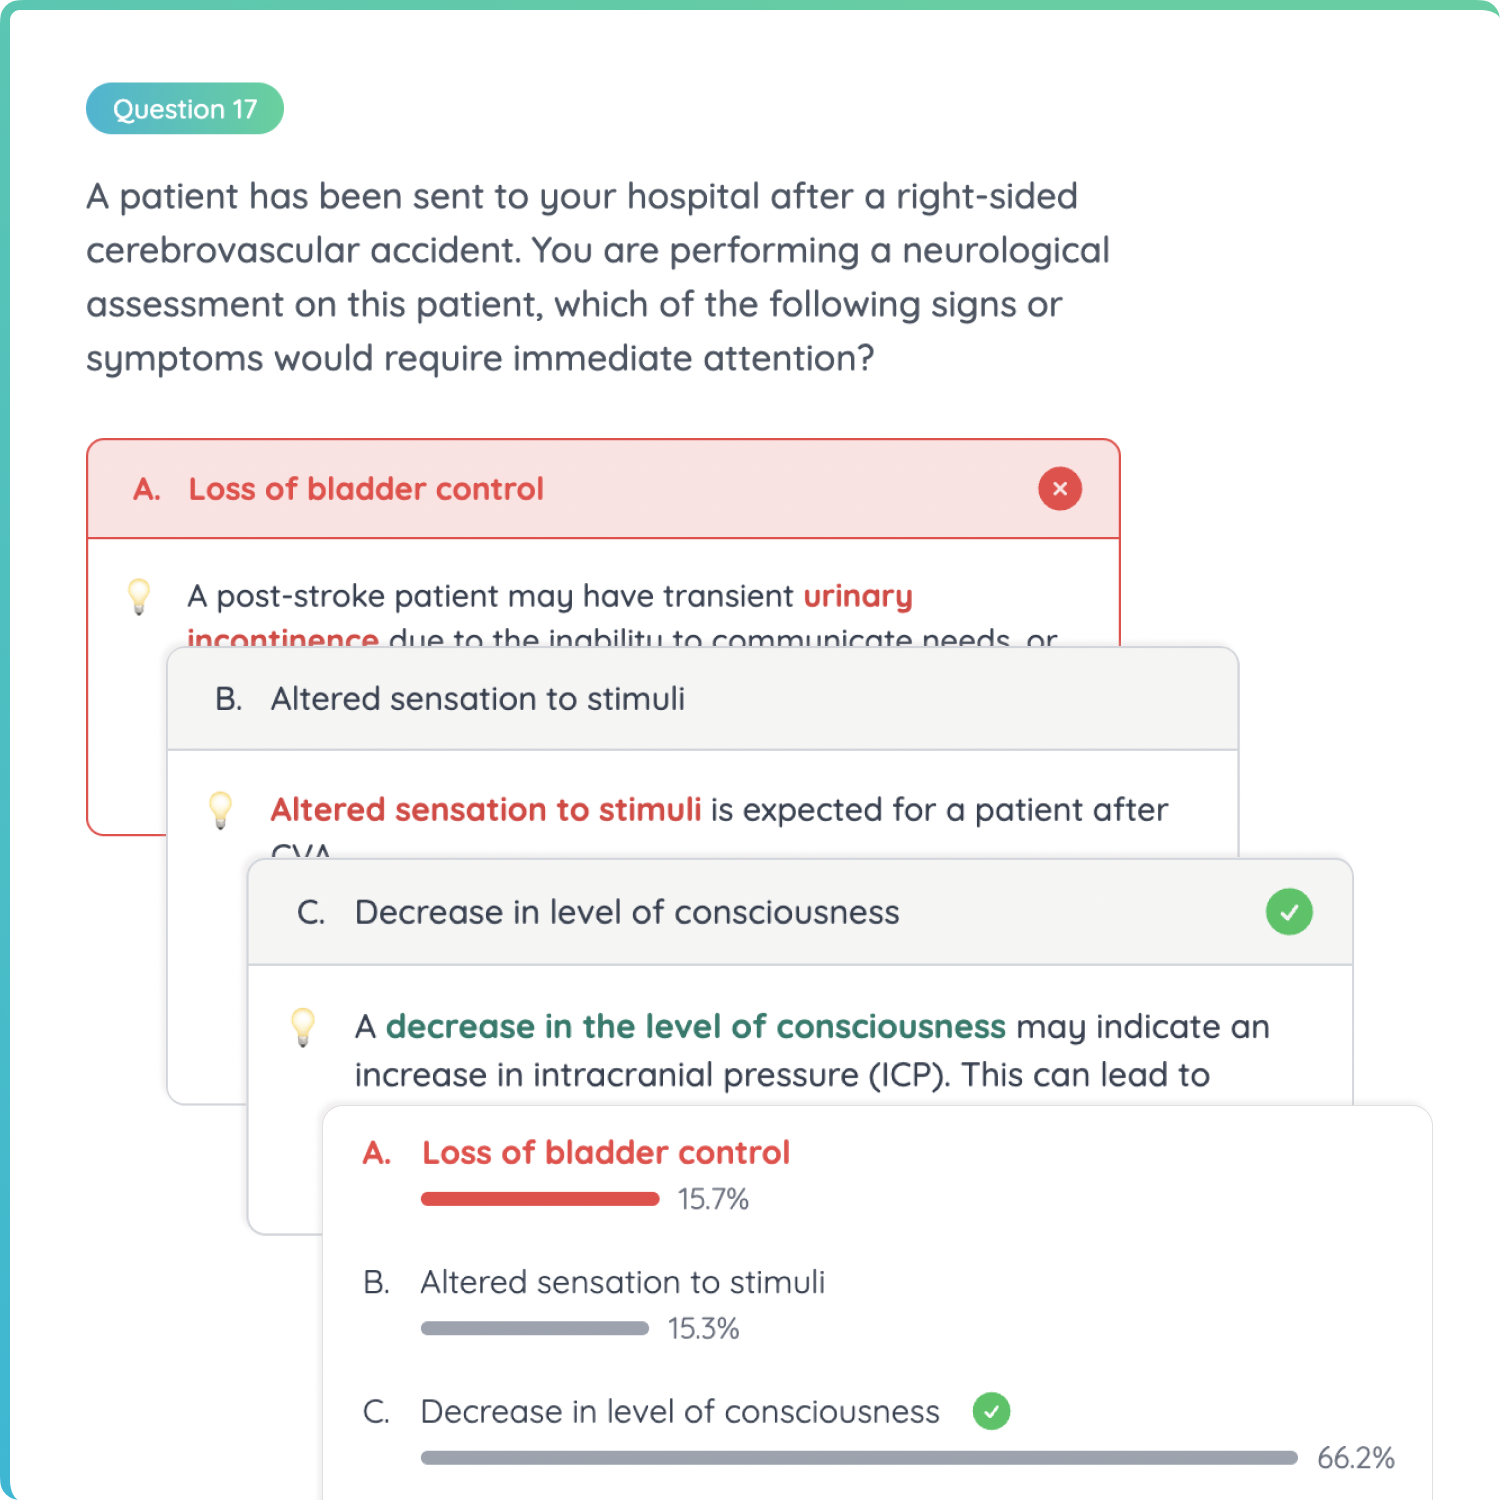 Every question comes with answers and detailed explanations with key learning points highlighted. You will receive real-time feedback after attempting a question.